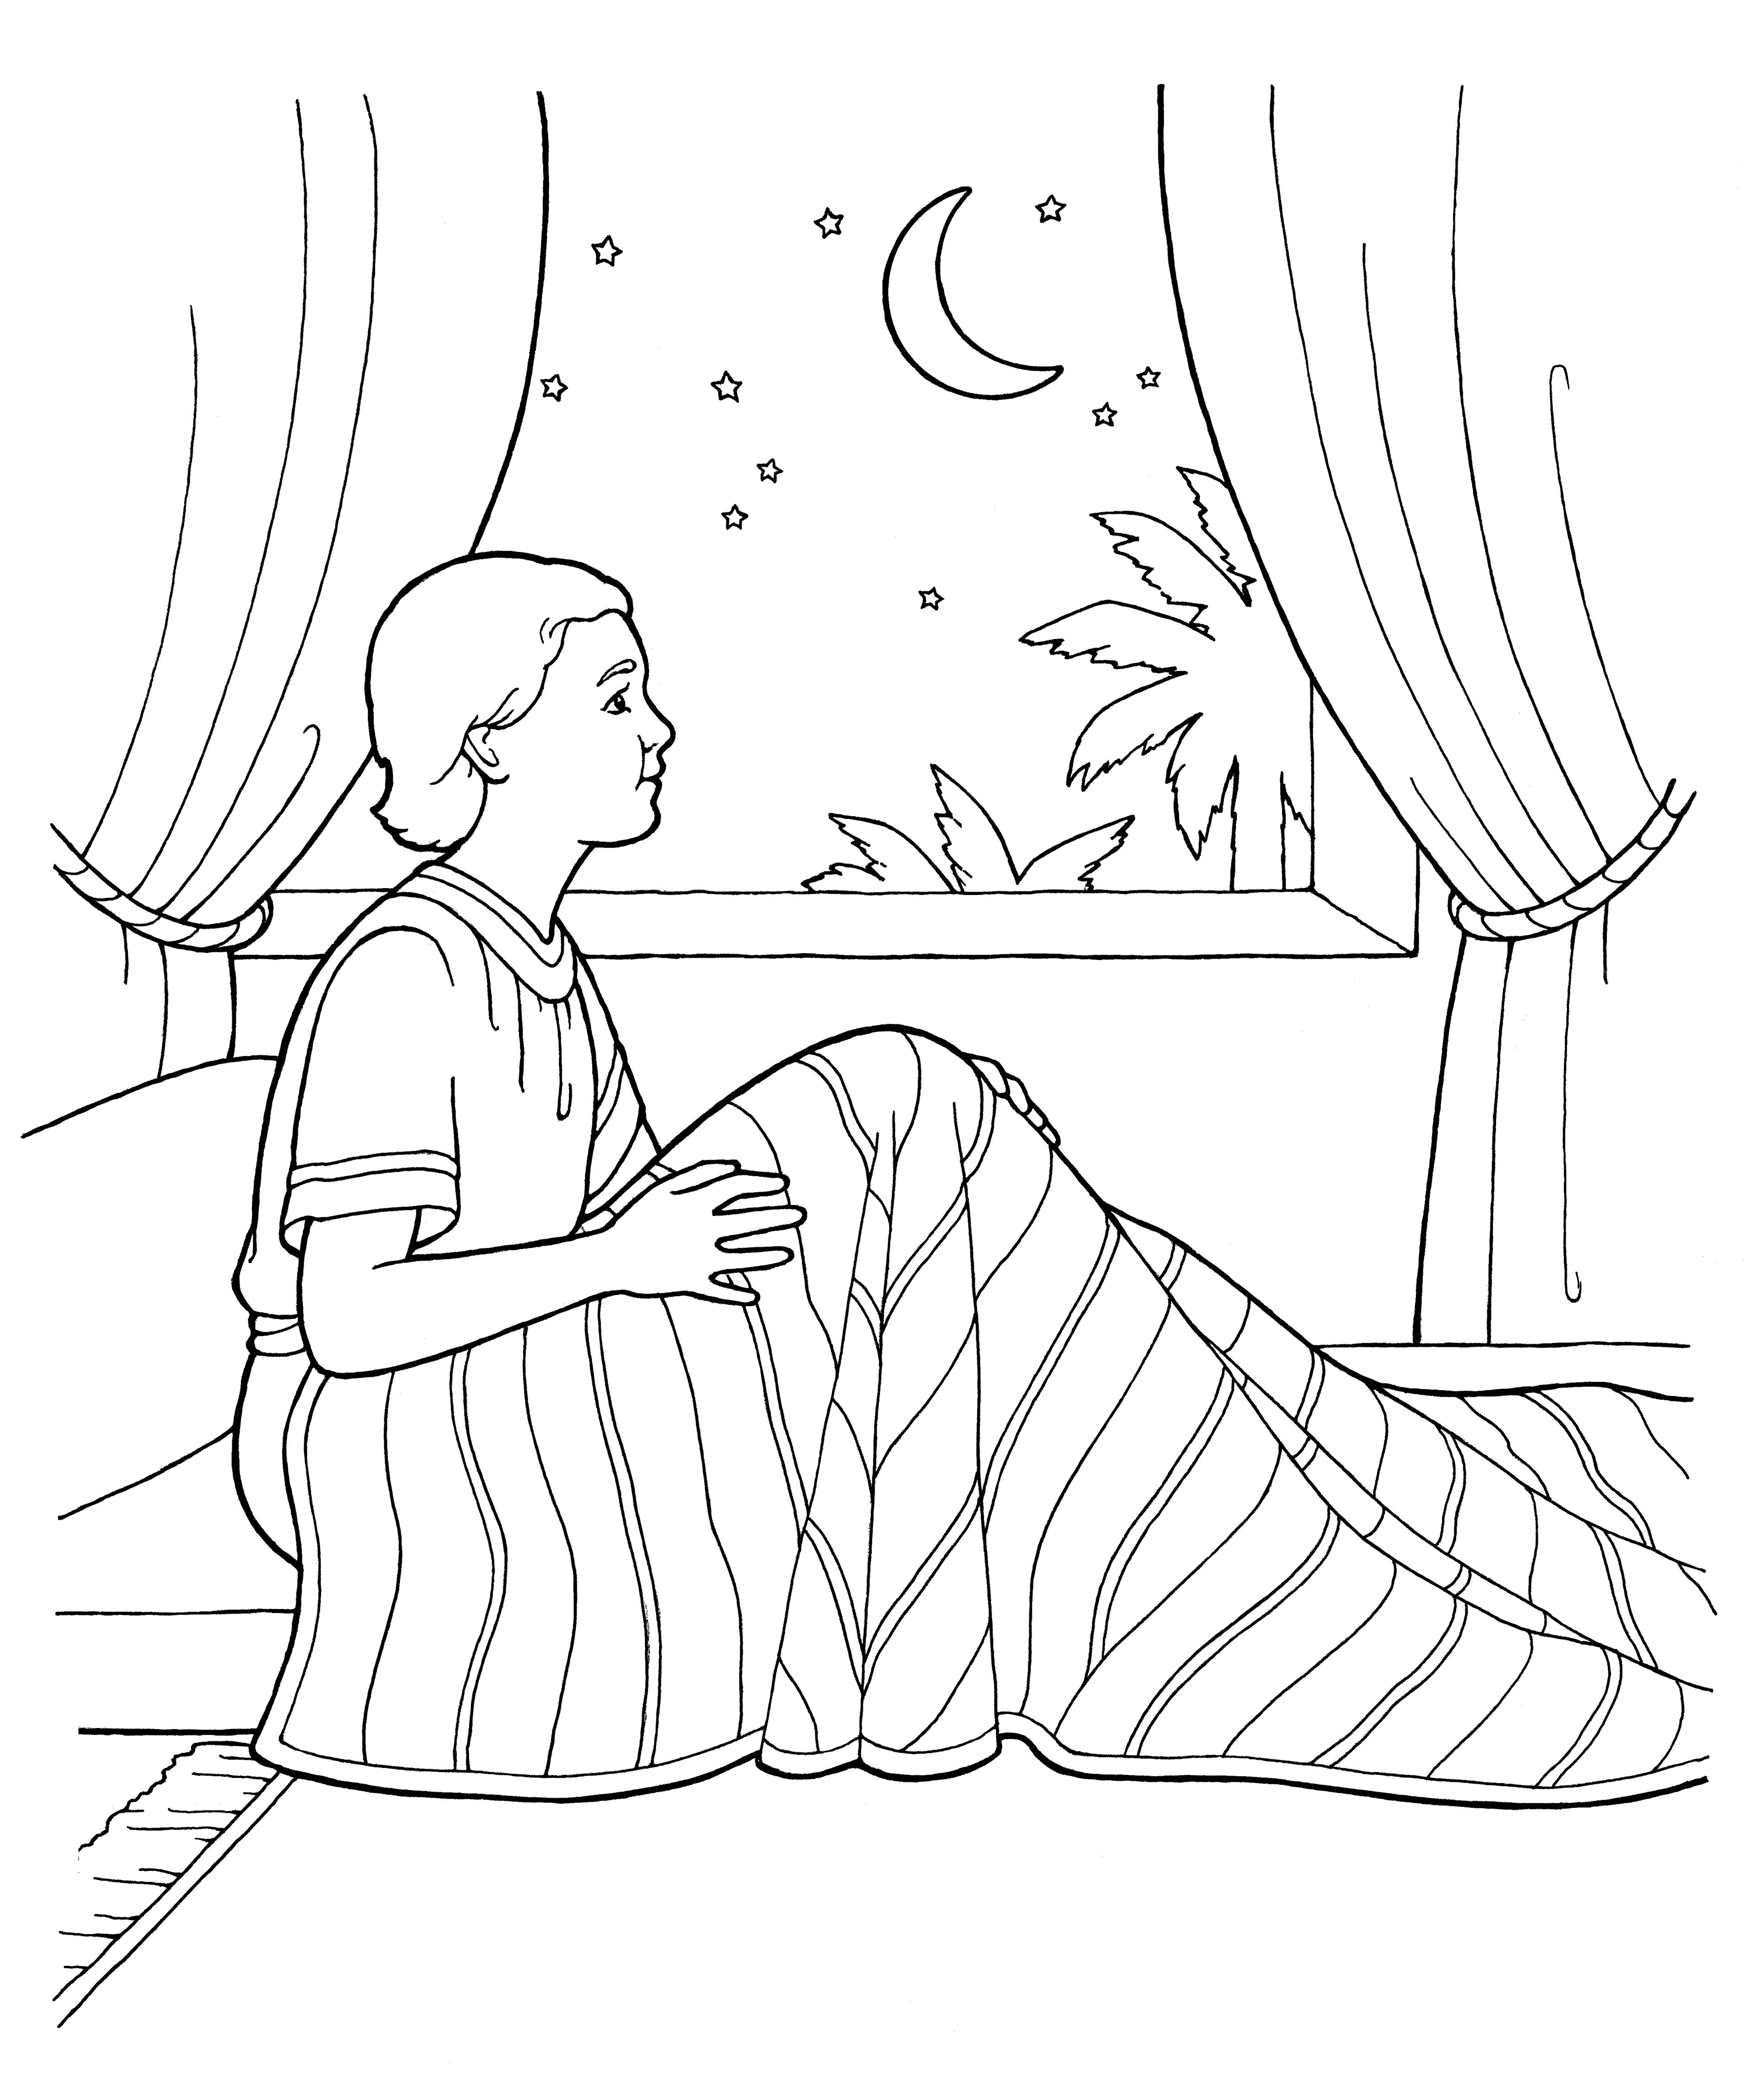 An illustration of the boy Samuel sitting up in bed.